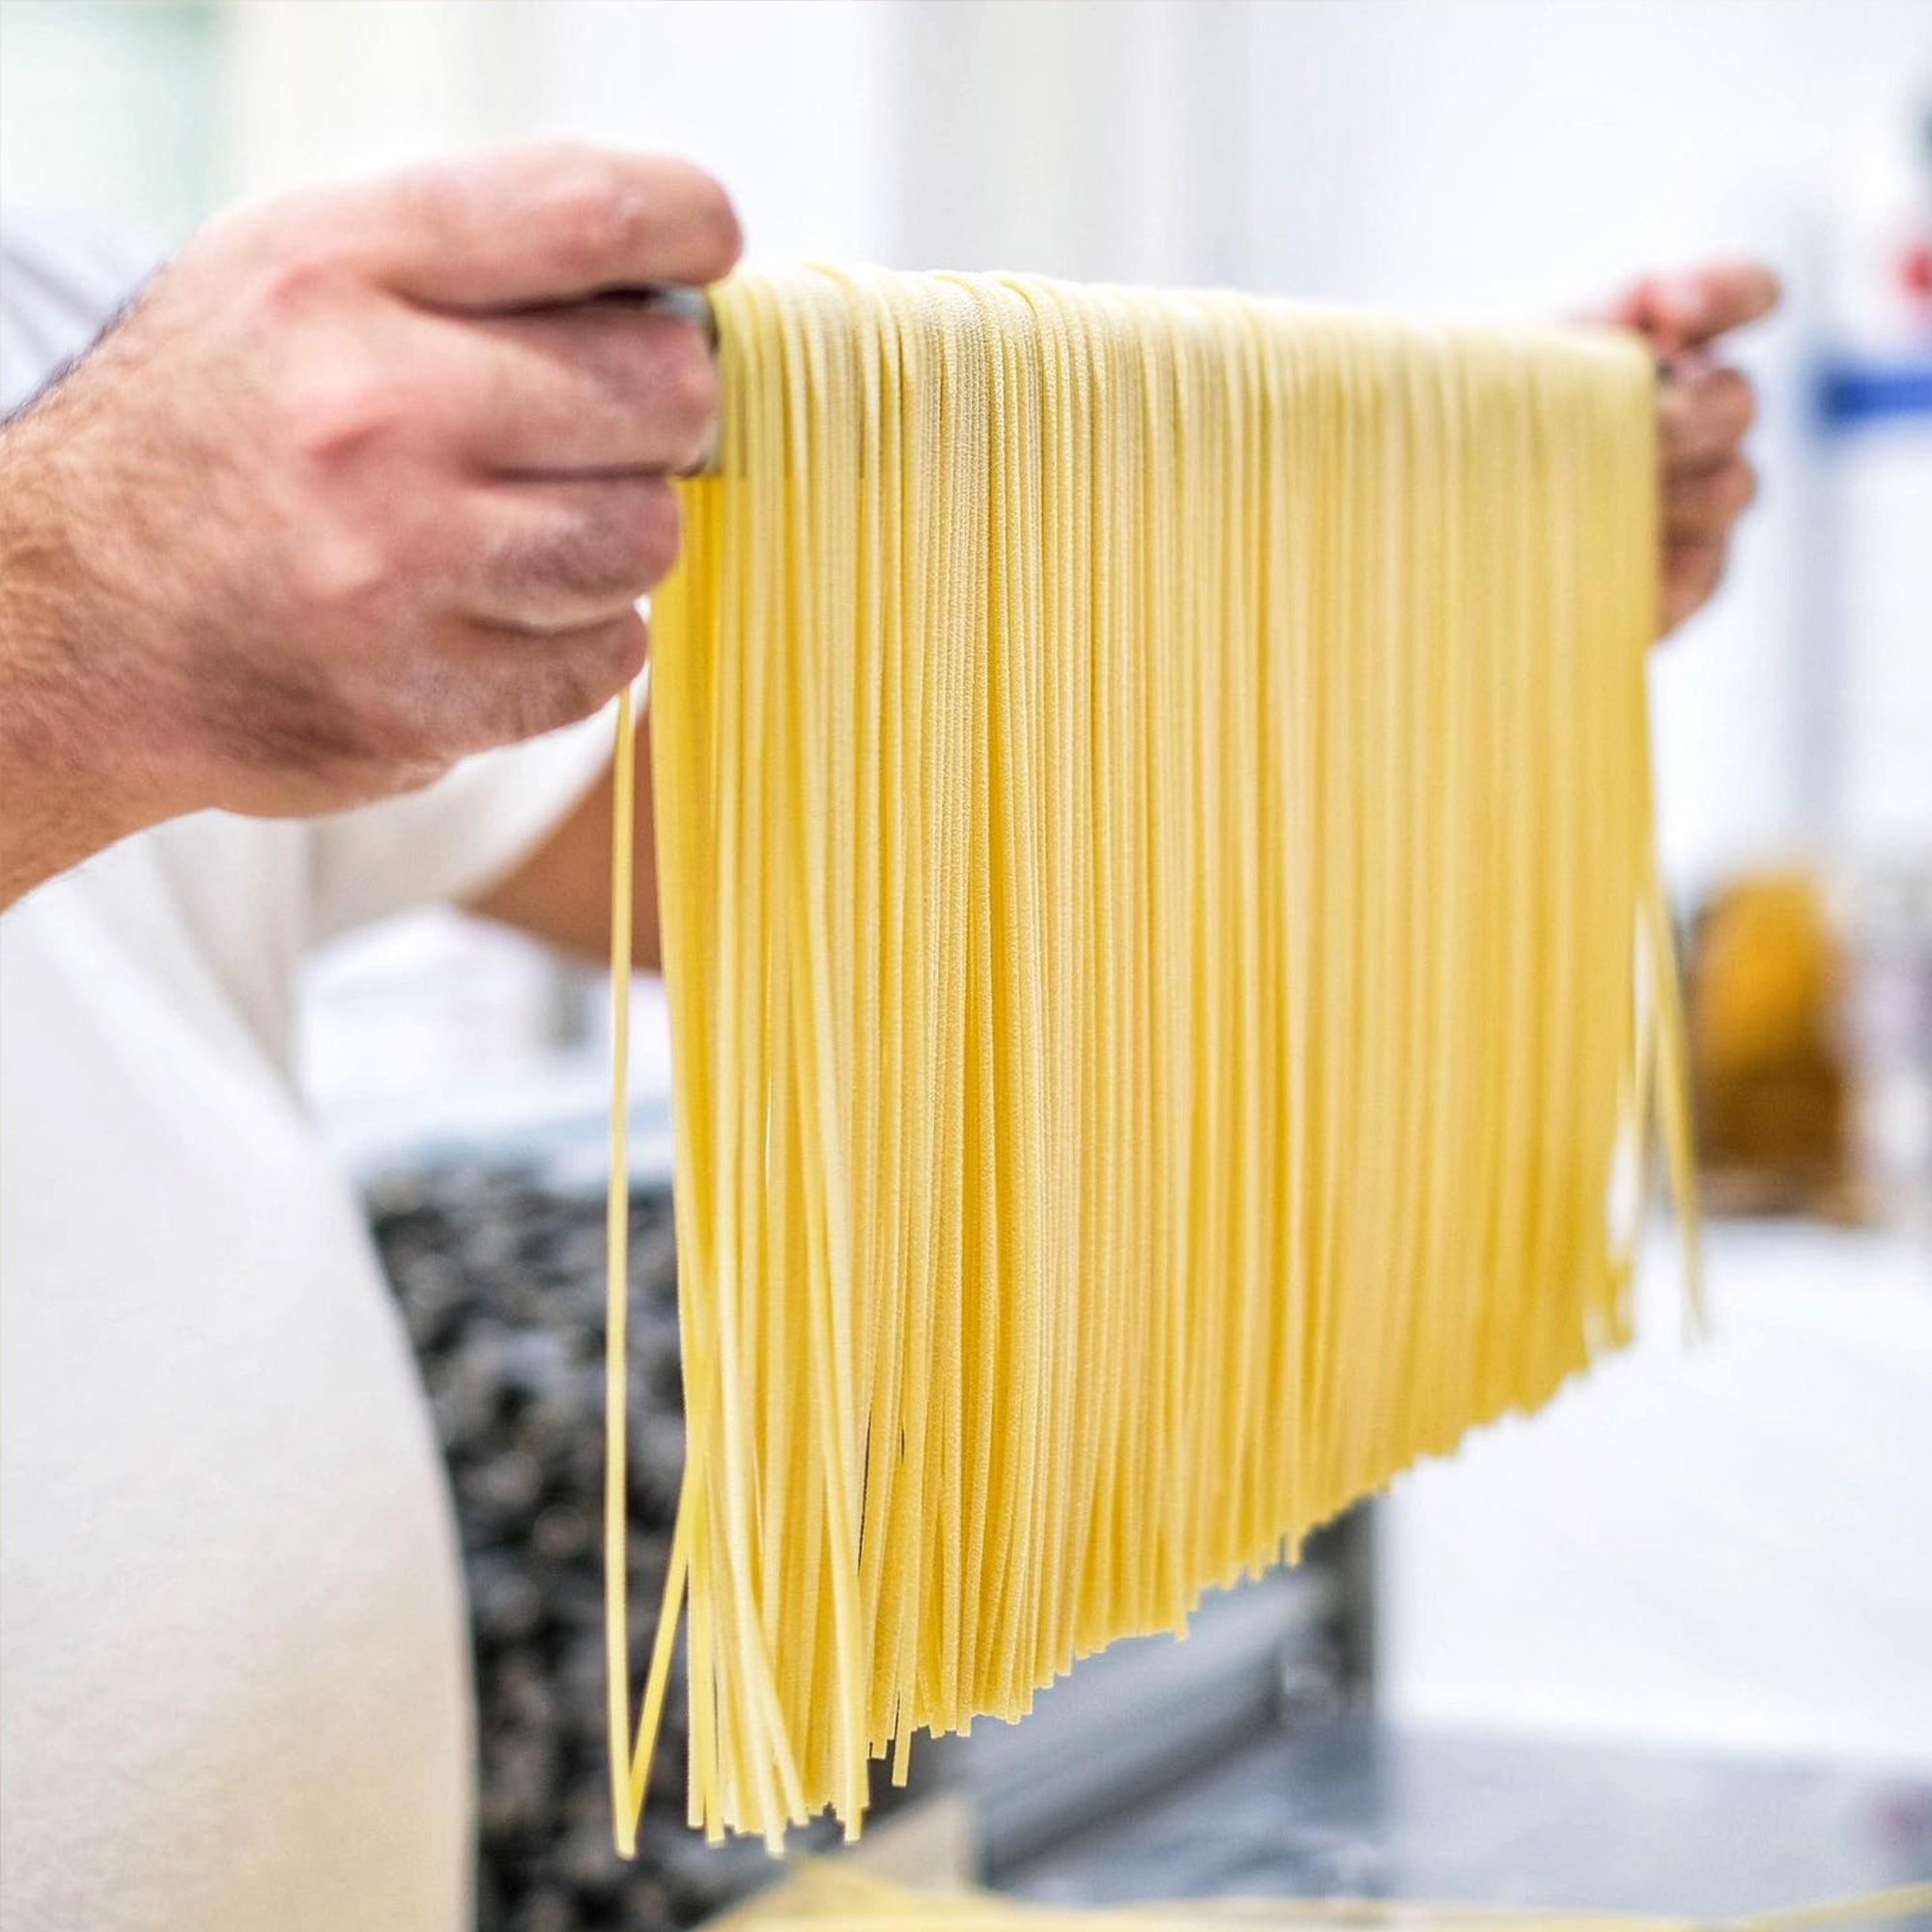 Knowing how to make pasta is a timeless art . Our company was born from the initiative and the innovation wish of the family Marulo, which aim was to produce a very high quality pasta that could be the expression of Torre Annunziata tradition. Today, our artesanal pasta is the result of a careful selection of the finest raw materials and of the traditional process that have always belonged to the culinary culture of Torre Annunziata.